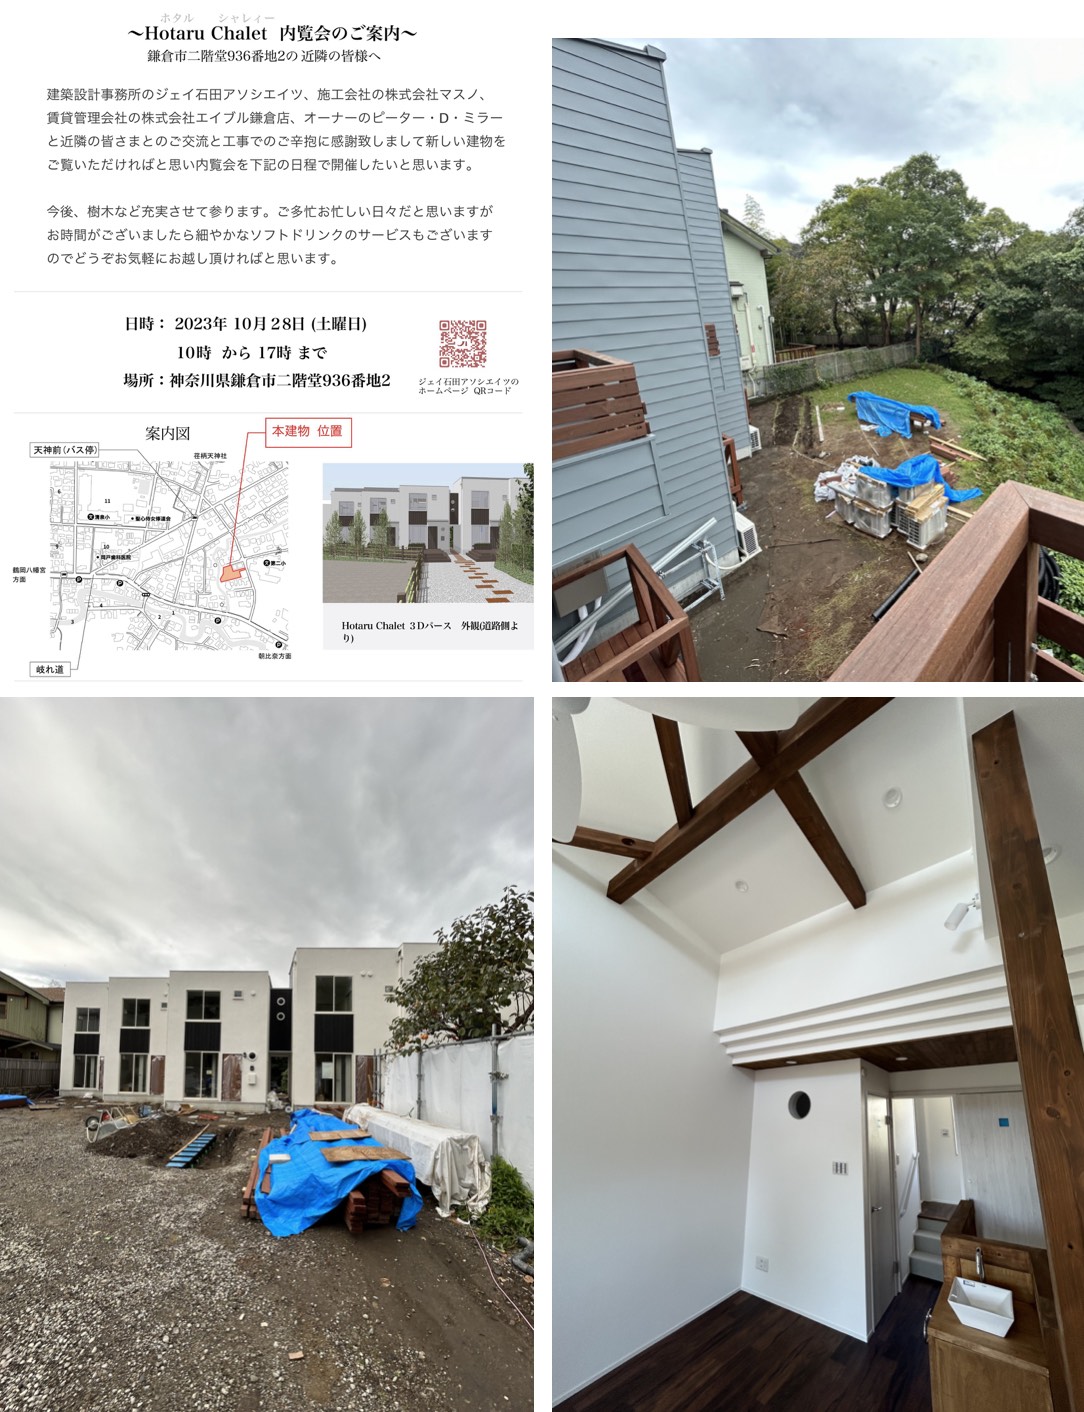 A preview of the building in Nikaido, Kamakura City, which Jay Ishida provided total coordination from land search to design to rental, will be held on Saturday, October 28th. If you have time, please come and check it out! Please check the flyer in the image for details.